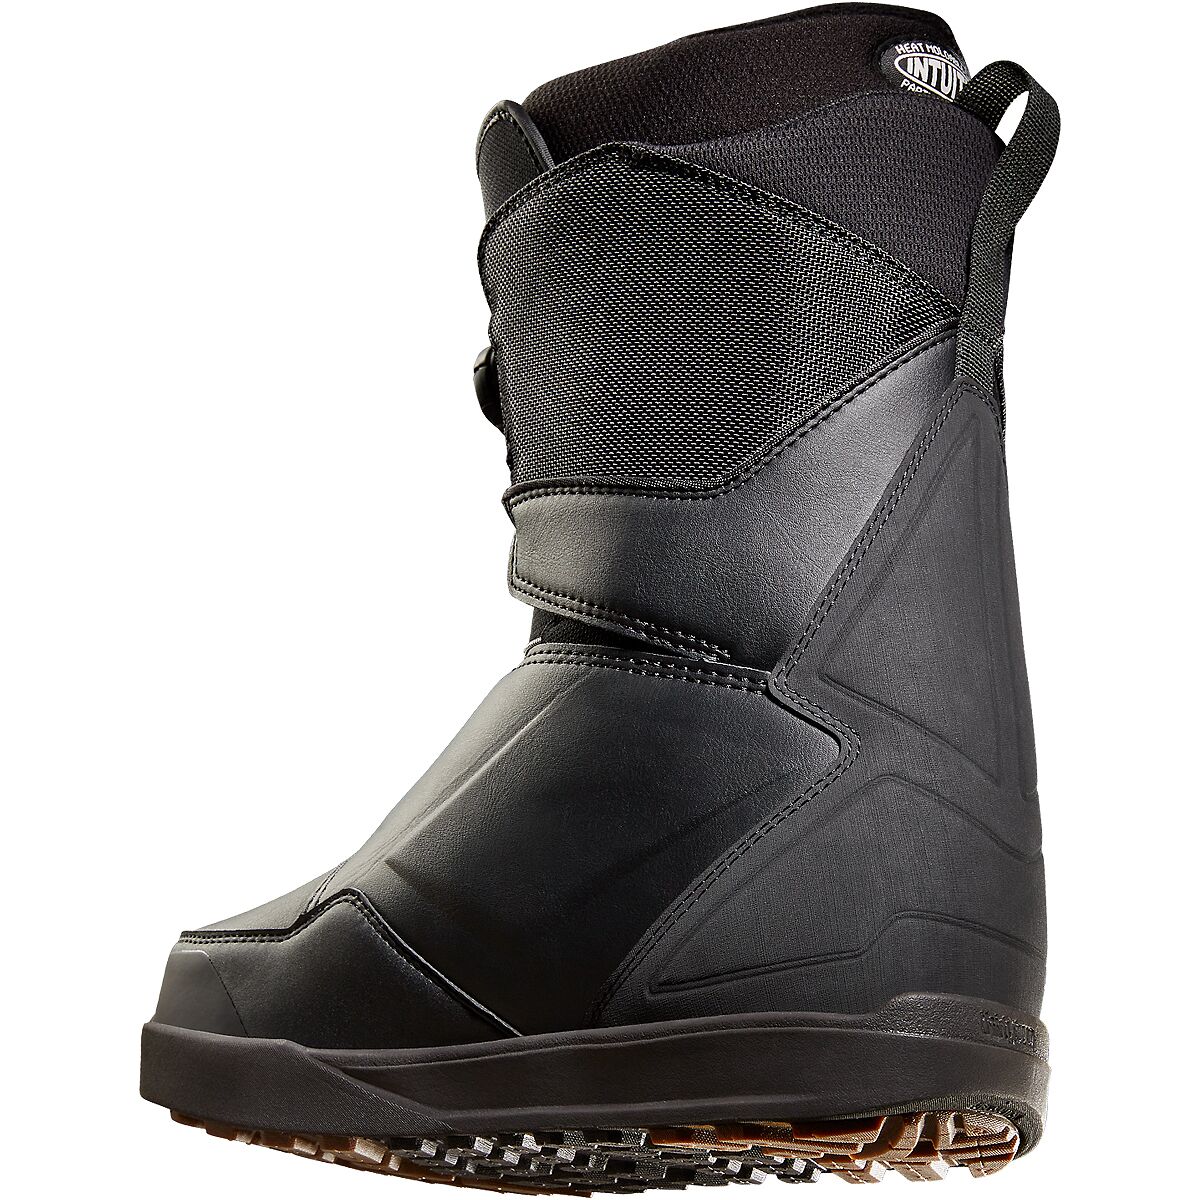  ThirtyTwo Lashed Double BOA Snowboard Boot - 2023 - Men